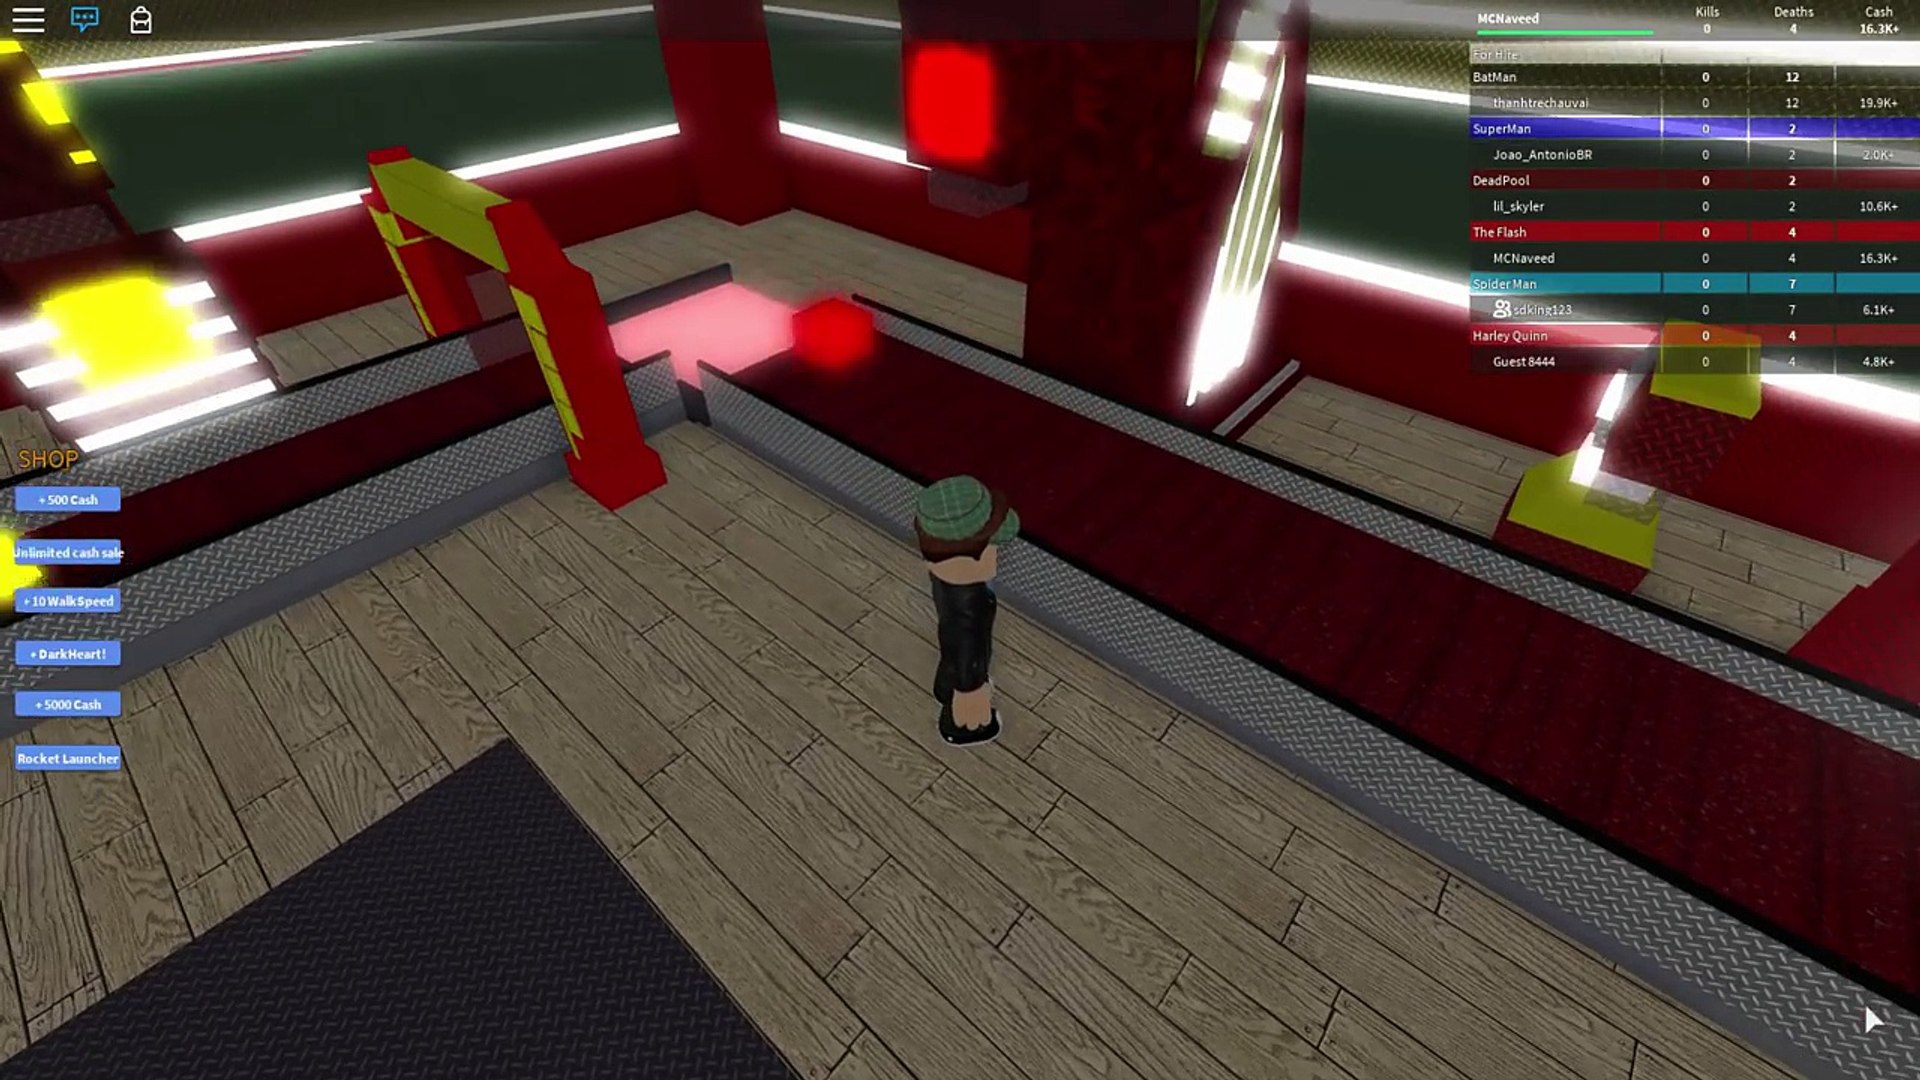 Roblox 2 Player Superhero Tycoon Codes Get A Robux - codes for superhero tycoon 2019 roblox